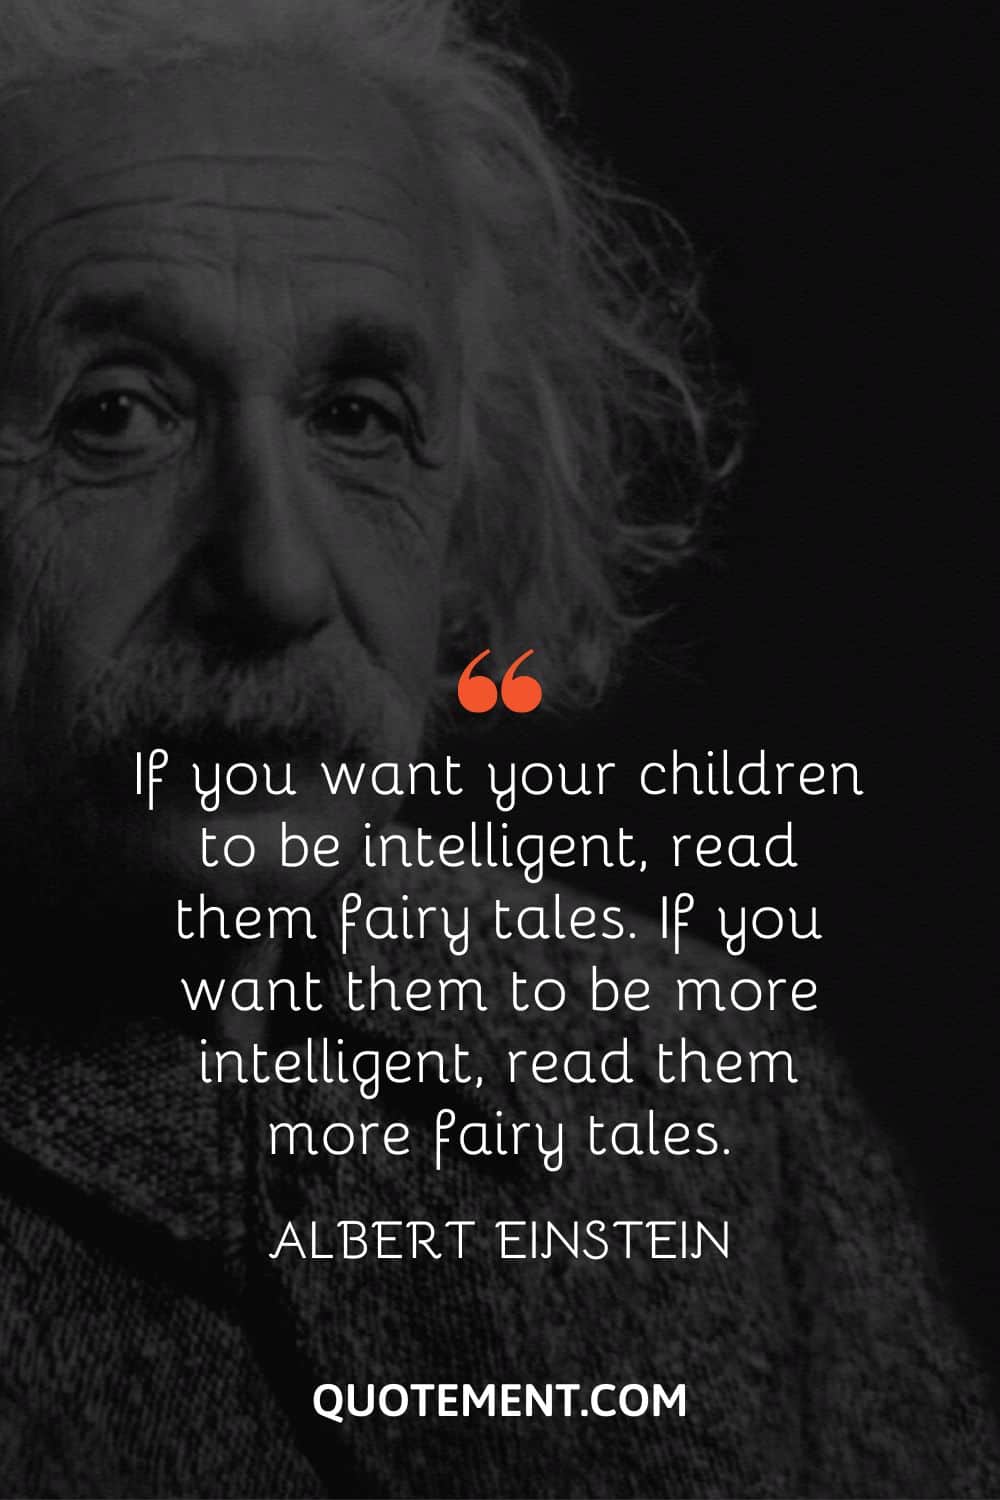 If you want your children to be intelligent, read them fairy tales